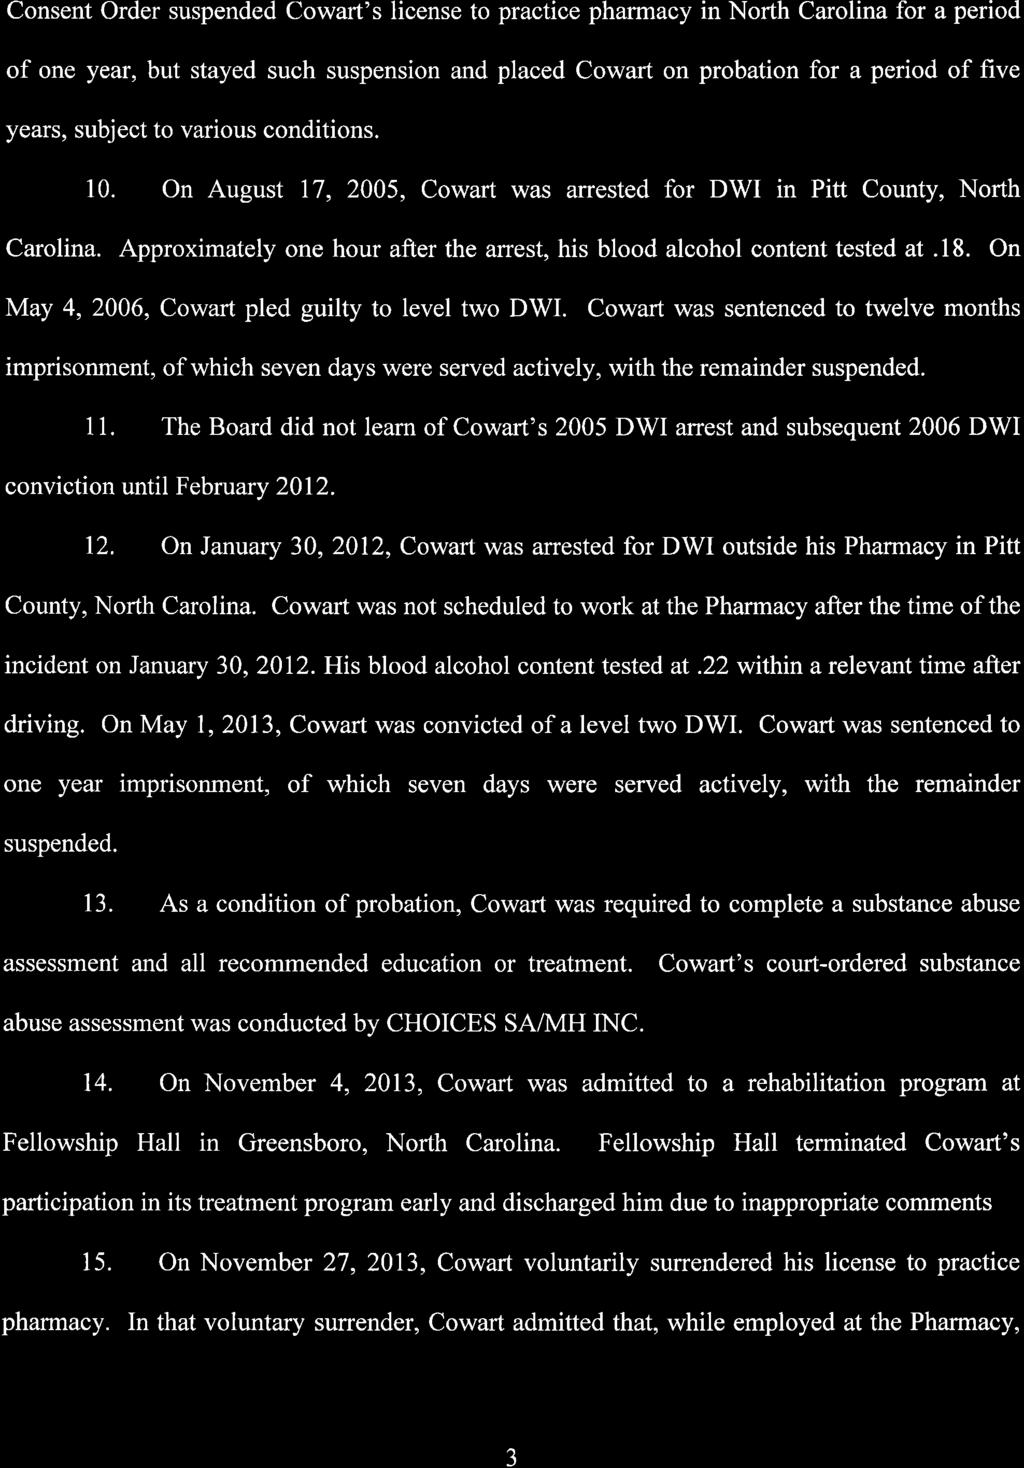 Consent Order suspended Cowaft's license to practice pharmacy in North Carolina for a period of one year, but stayed such suspension and placed Cowart on probation for a period of five years, subject